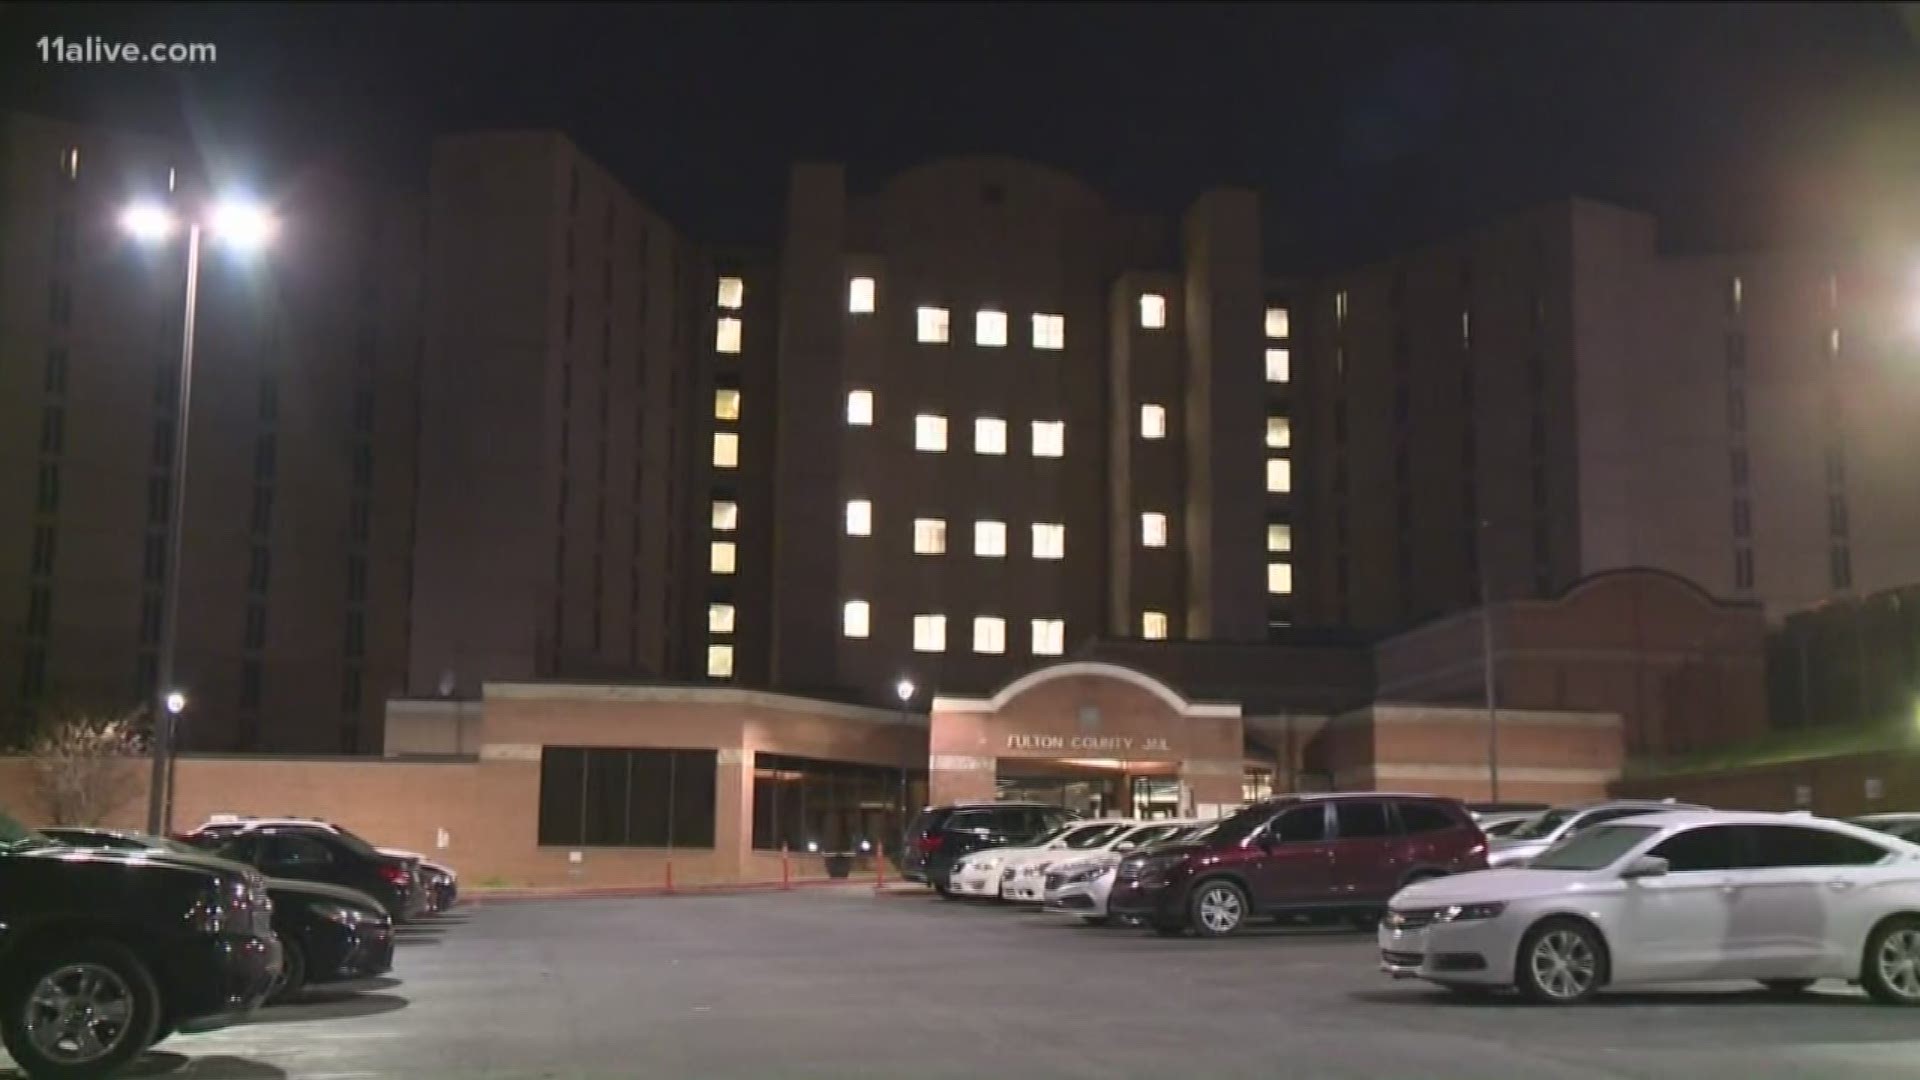 Fulton County Jail currently has no confirmed or suspected cases of coronavirus.